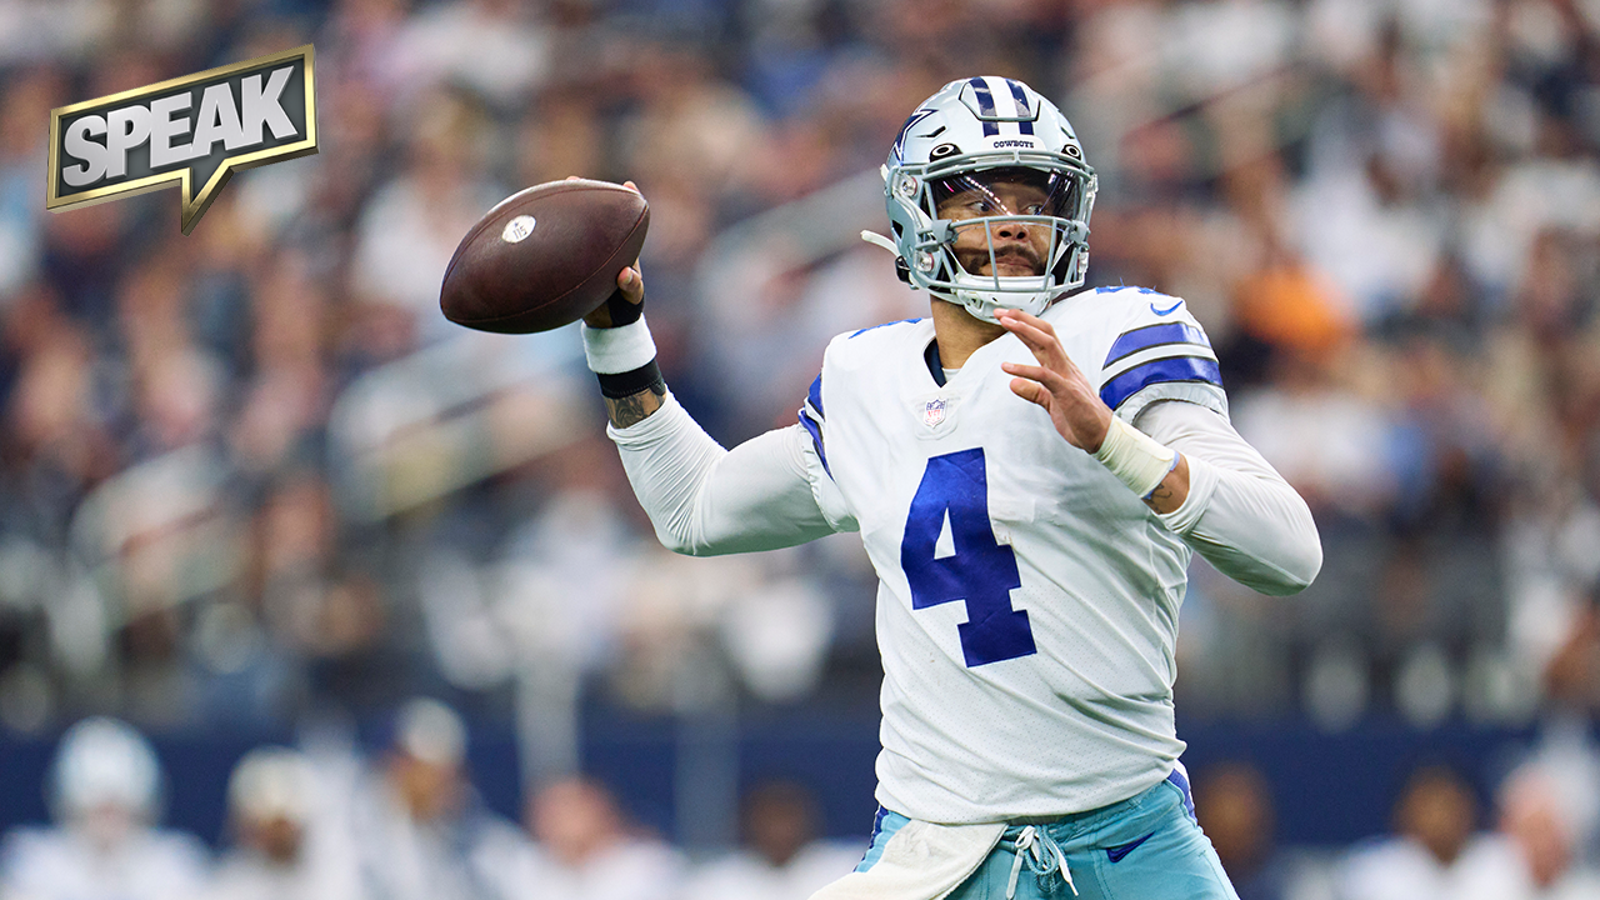 Can Dak carry the Cowboys offense against the Bears in Week 8?  |  SPEAK